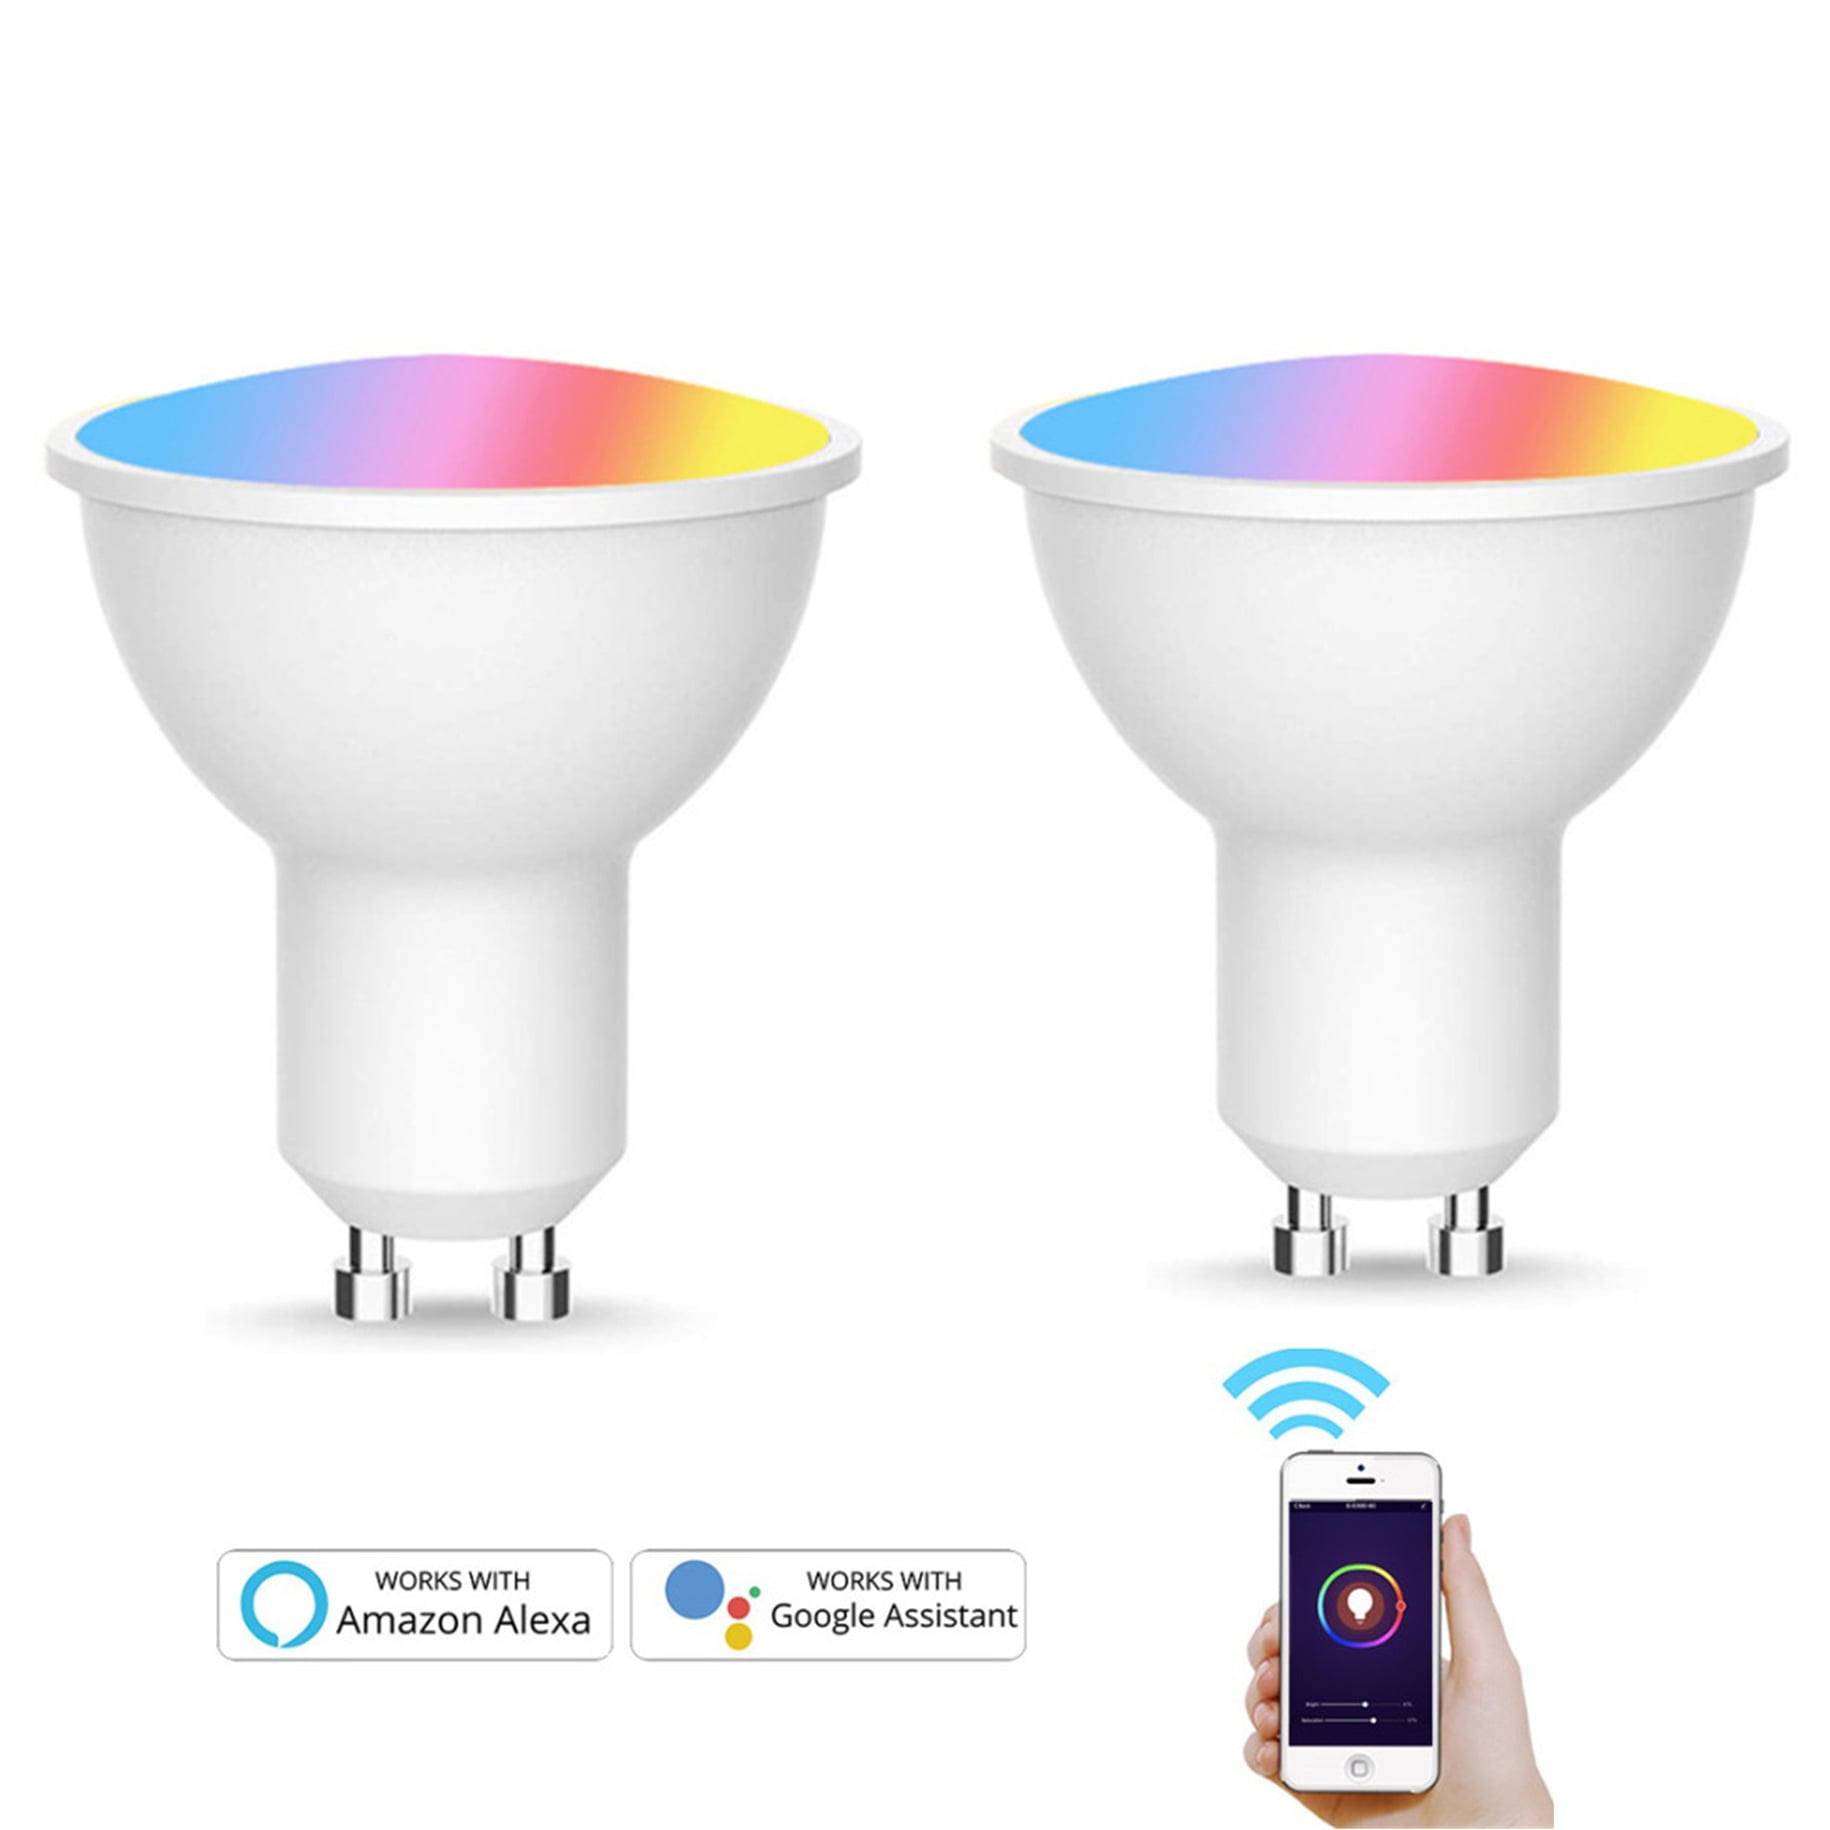 verlichten idioom rek 2 Pack Gu10 Smart LED Light Bulb RGBCW Color Changing Lights Dimmable Smart  Wifi Bulb Work with Alexa, Google Assistant, No Hub Required - Walmart.com